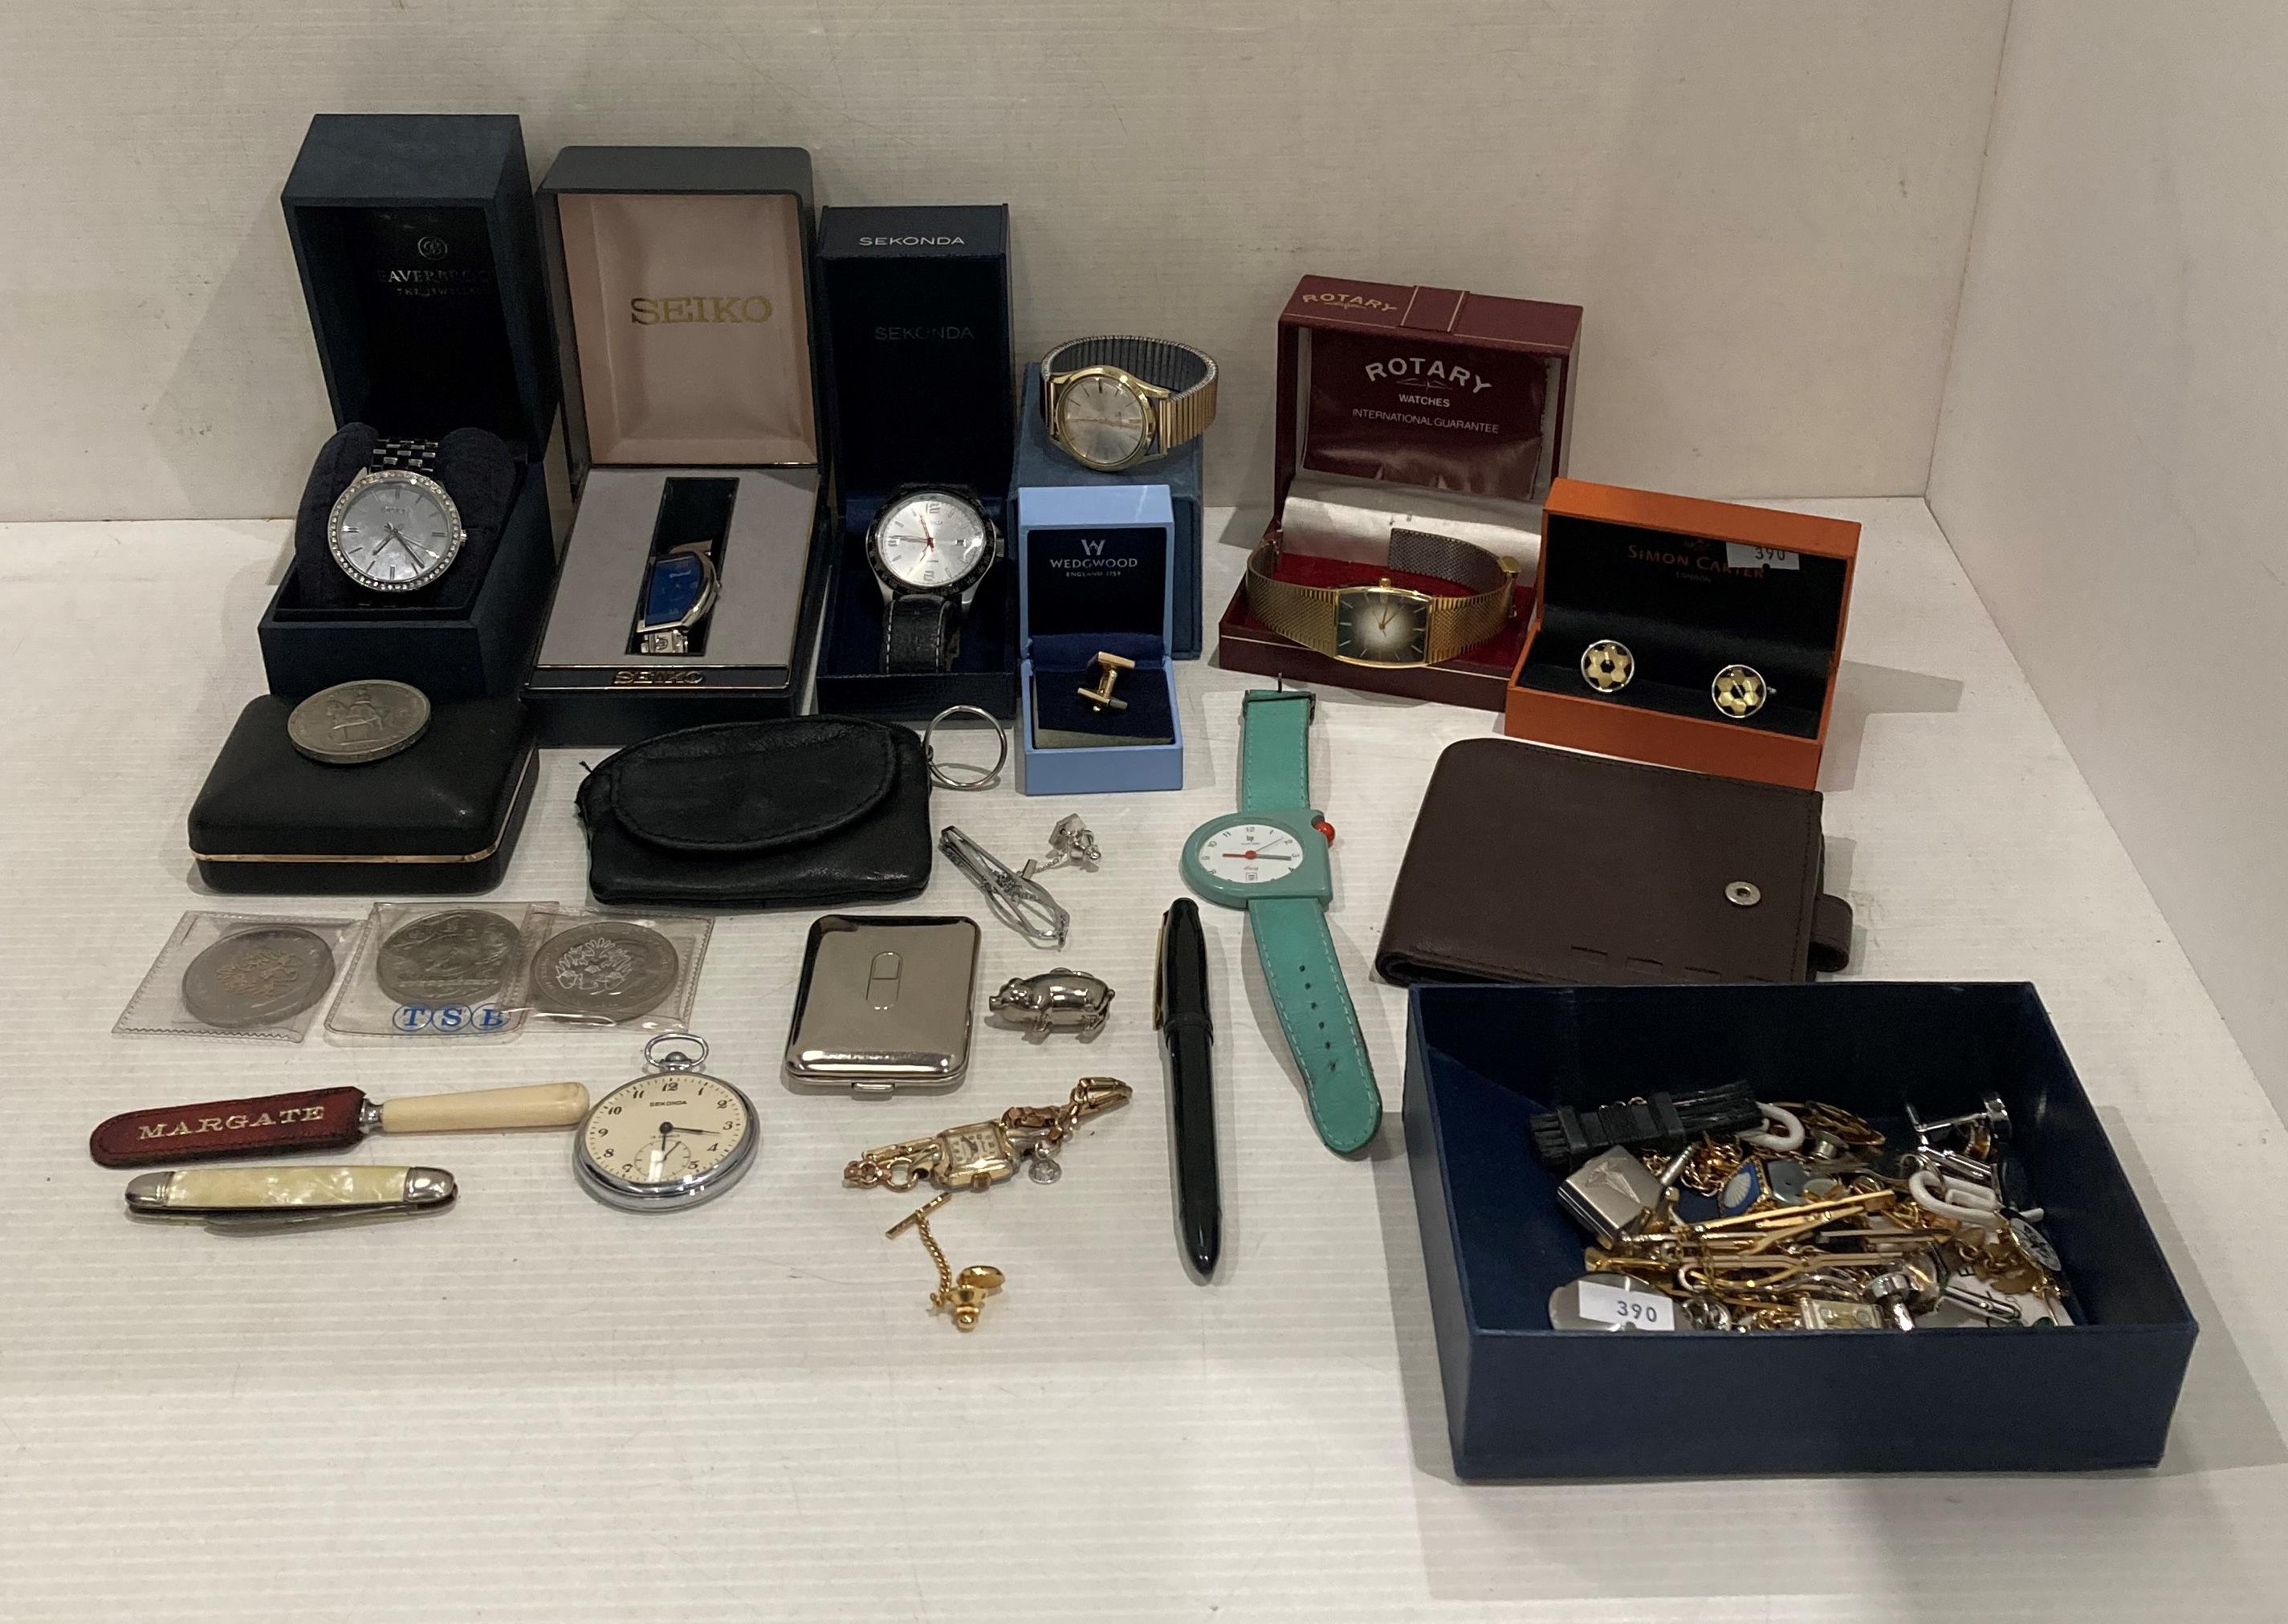 Contents to box - seven assorted watches including DKNY, Sekonda,